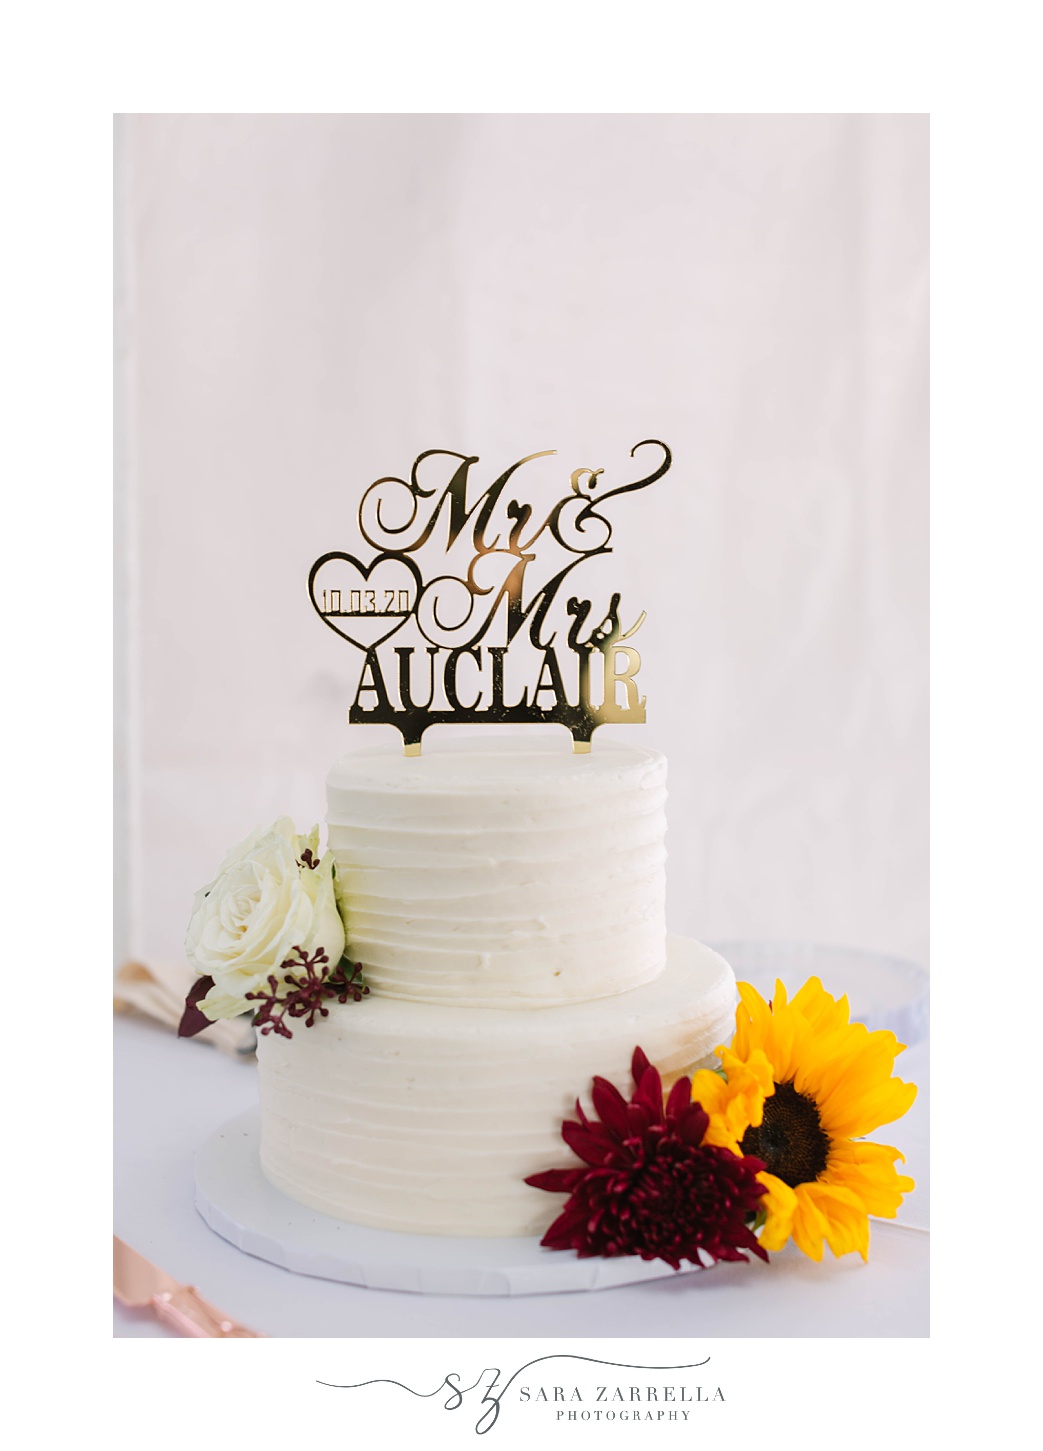 wedding cake with sunflowers accents for Warwick RI wedding